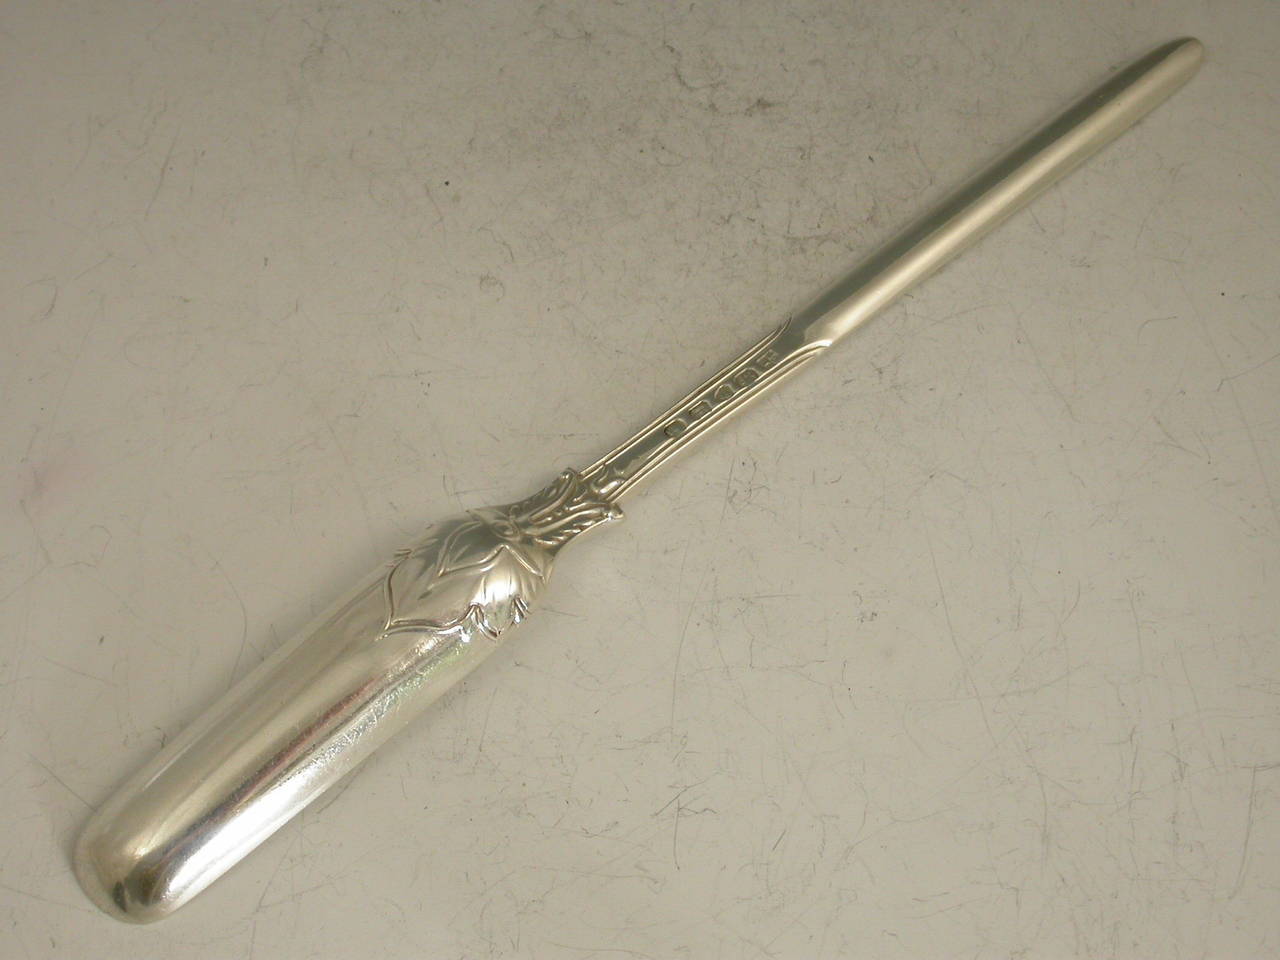 A fine and rare Victorian cast silver marrow scoop in scroll rosette pattern. 

By Henry & John Lias, London, 1847.

In good condition with no damage or repair

Measures: Length 223 mm (8.78 inches)
Weight 57.00 grams (1.83 troy ounces).